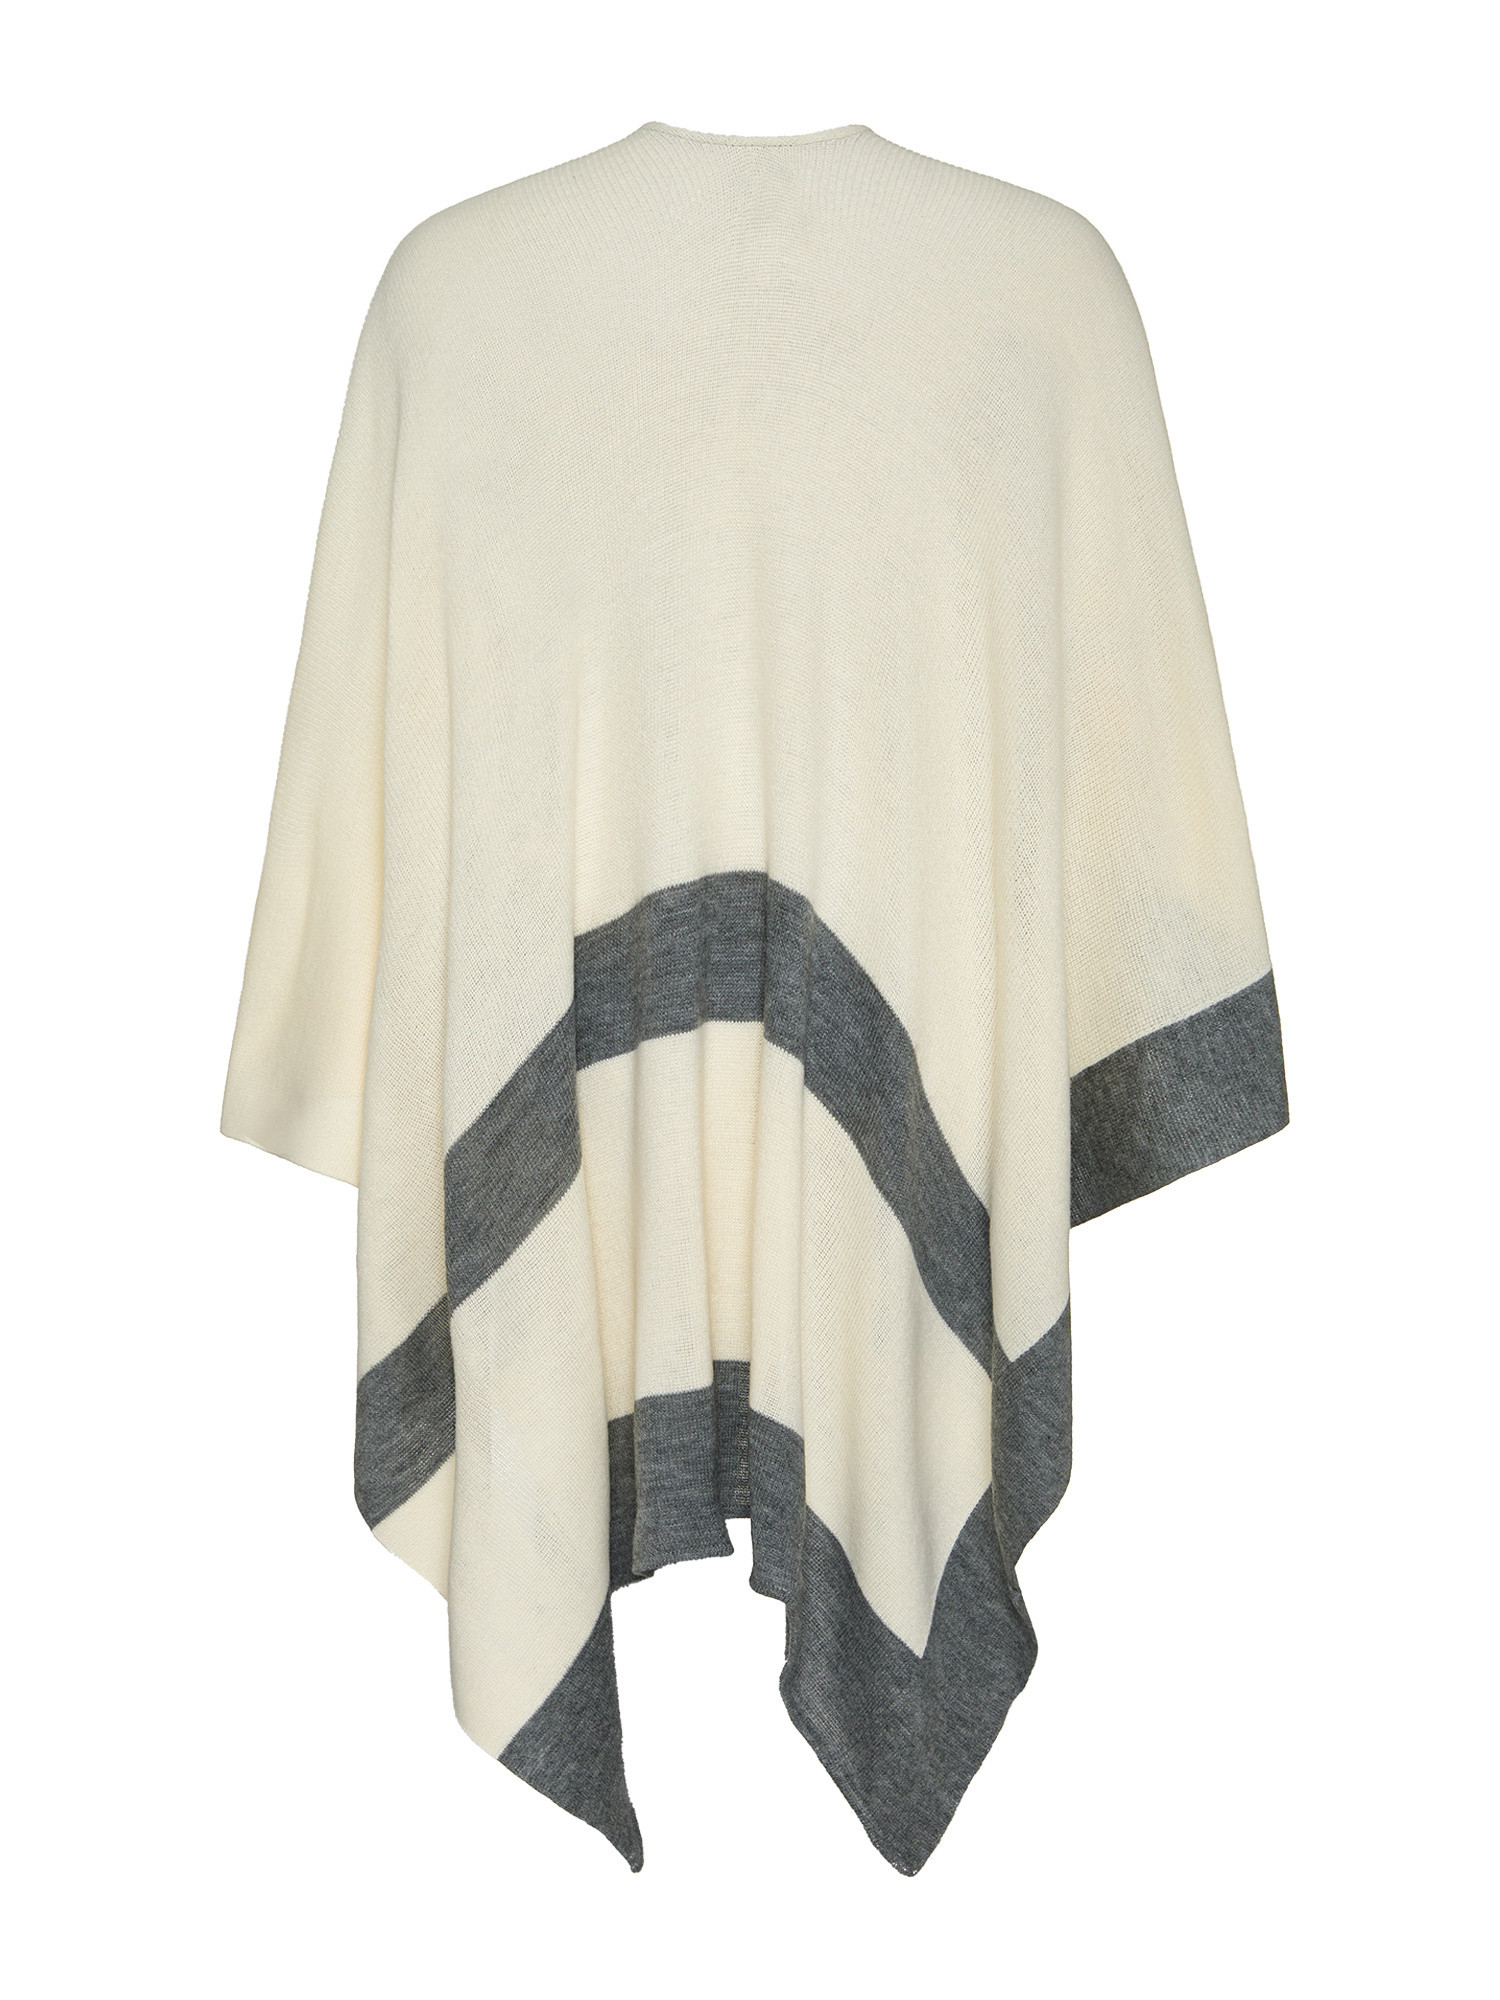 Koan - Two-tone knitted poncho, Grey, large image number 1